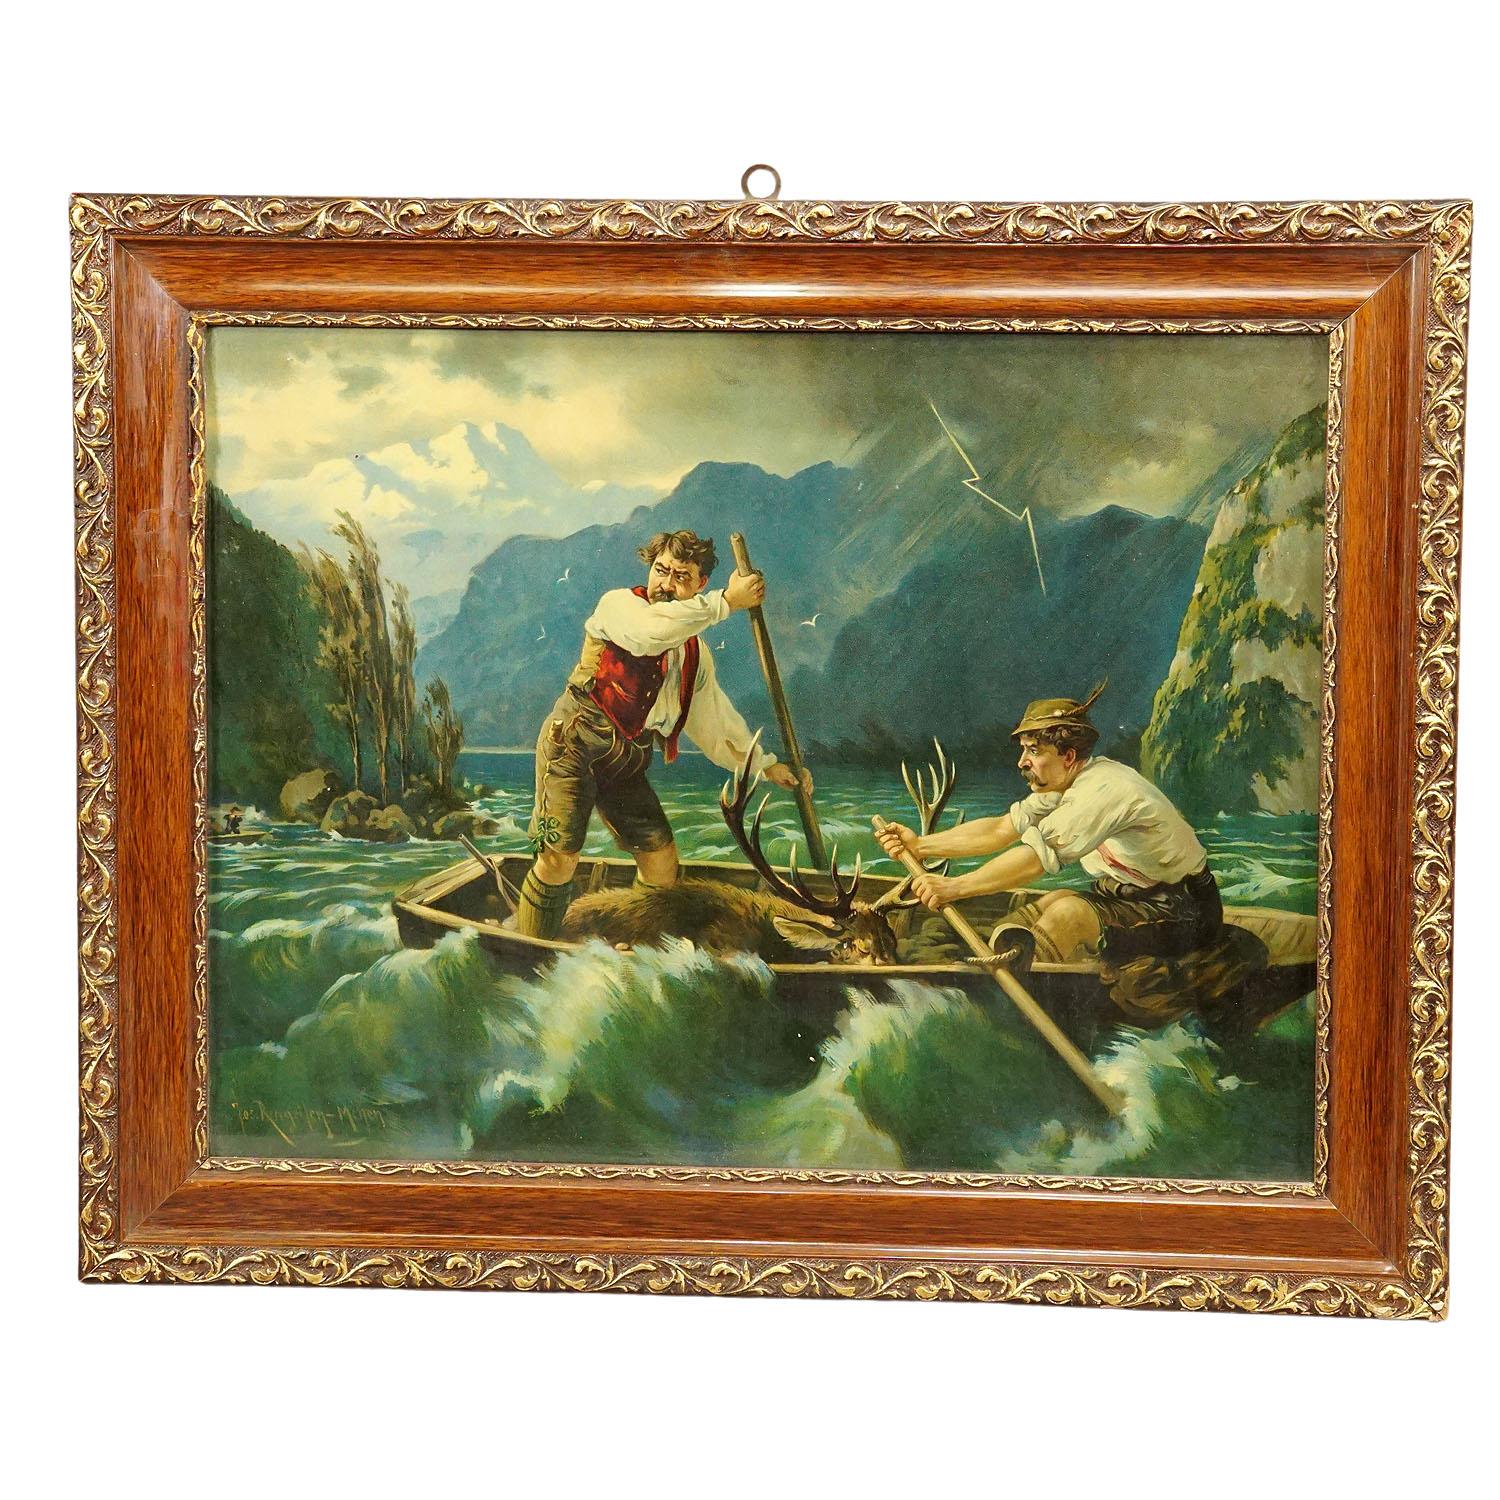 Antique Oil Print with Dramatic Poacher Scene after Josef Ringeisen

A colorful oil print depicting a dramatic poaching scenery in the Bavarian forest. Two poachers in a boat try to escape while the hunter is shooting on them. The template for